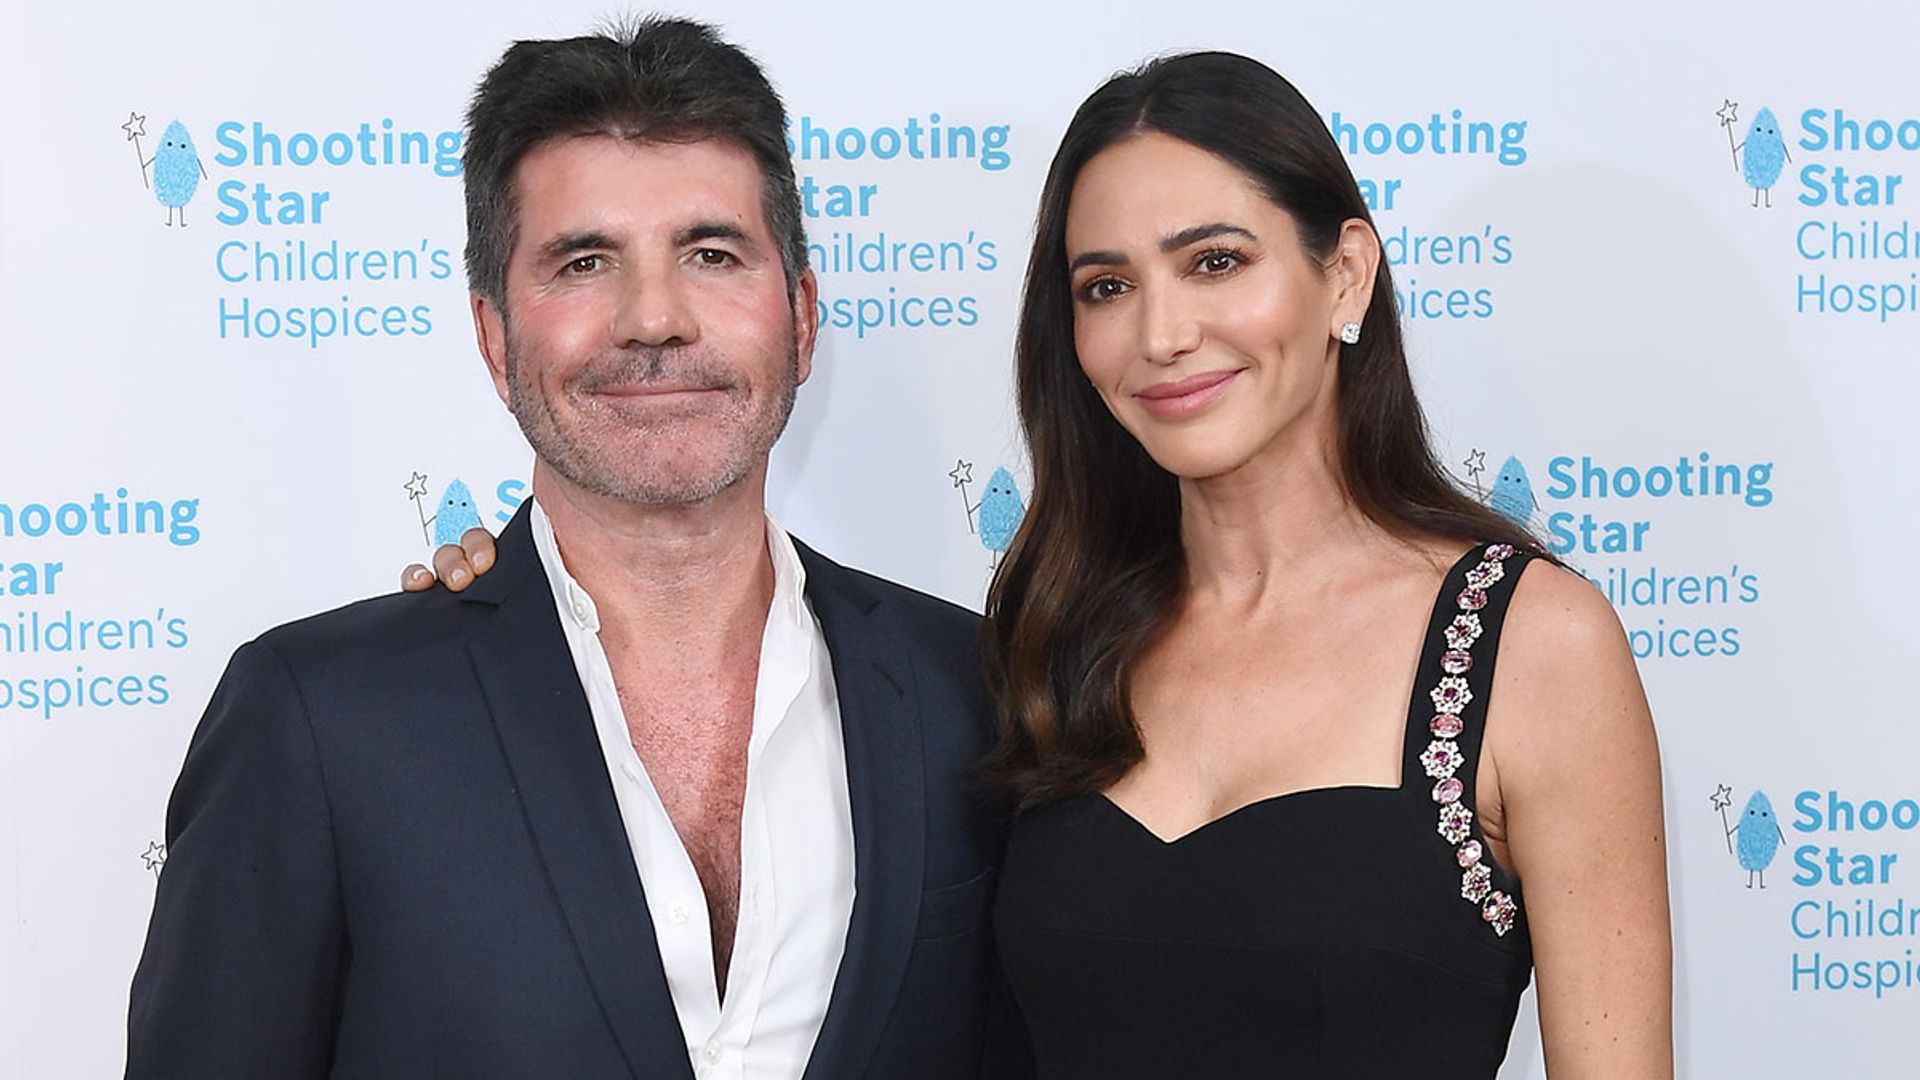 BUDGET RANGE SIMON COWELL READY TO WEAR CELEBRITY FACE MASK 